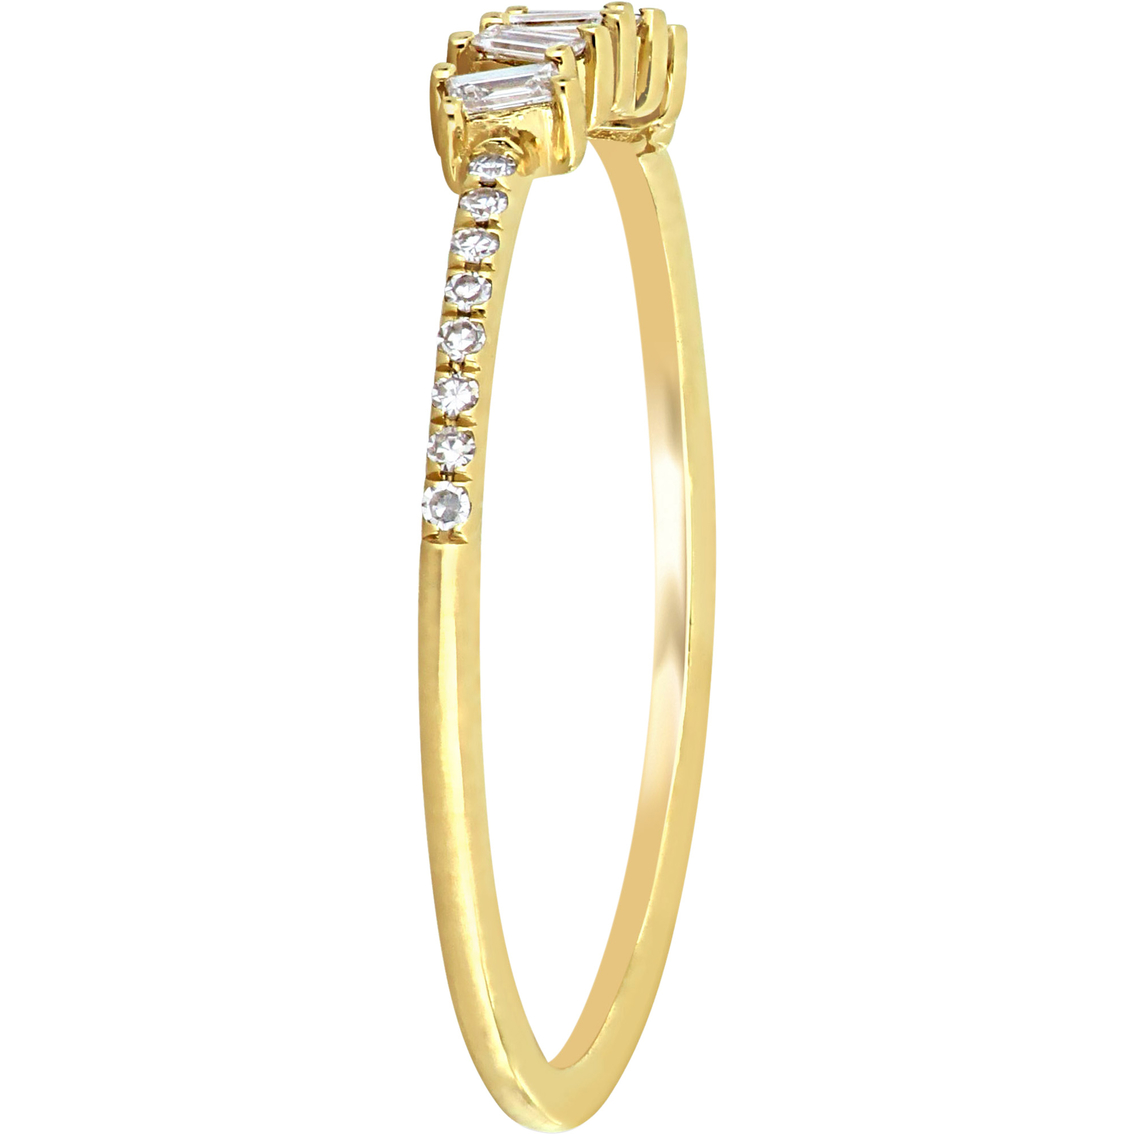 Diamore 14K Yellow Gold 1/6 CTW Baguette and Round Diamond Fashion Ring - Image 2 of 4